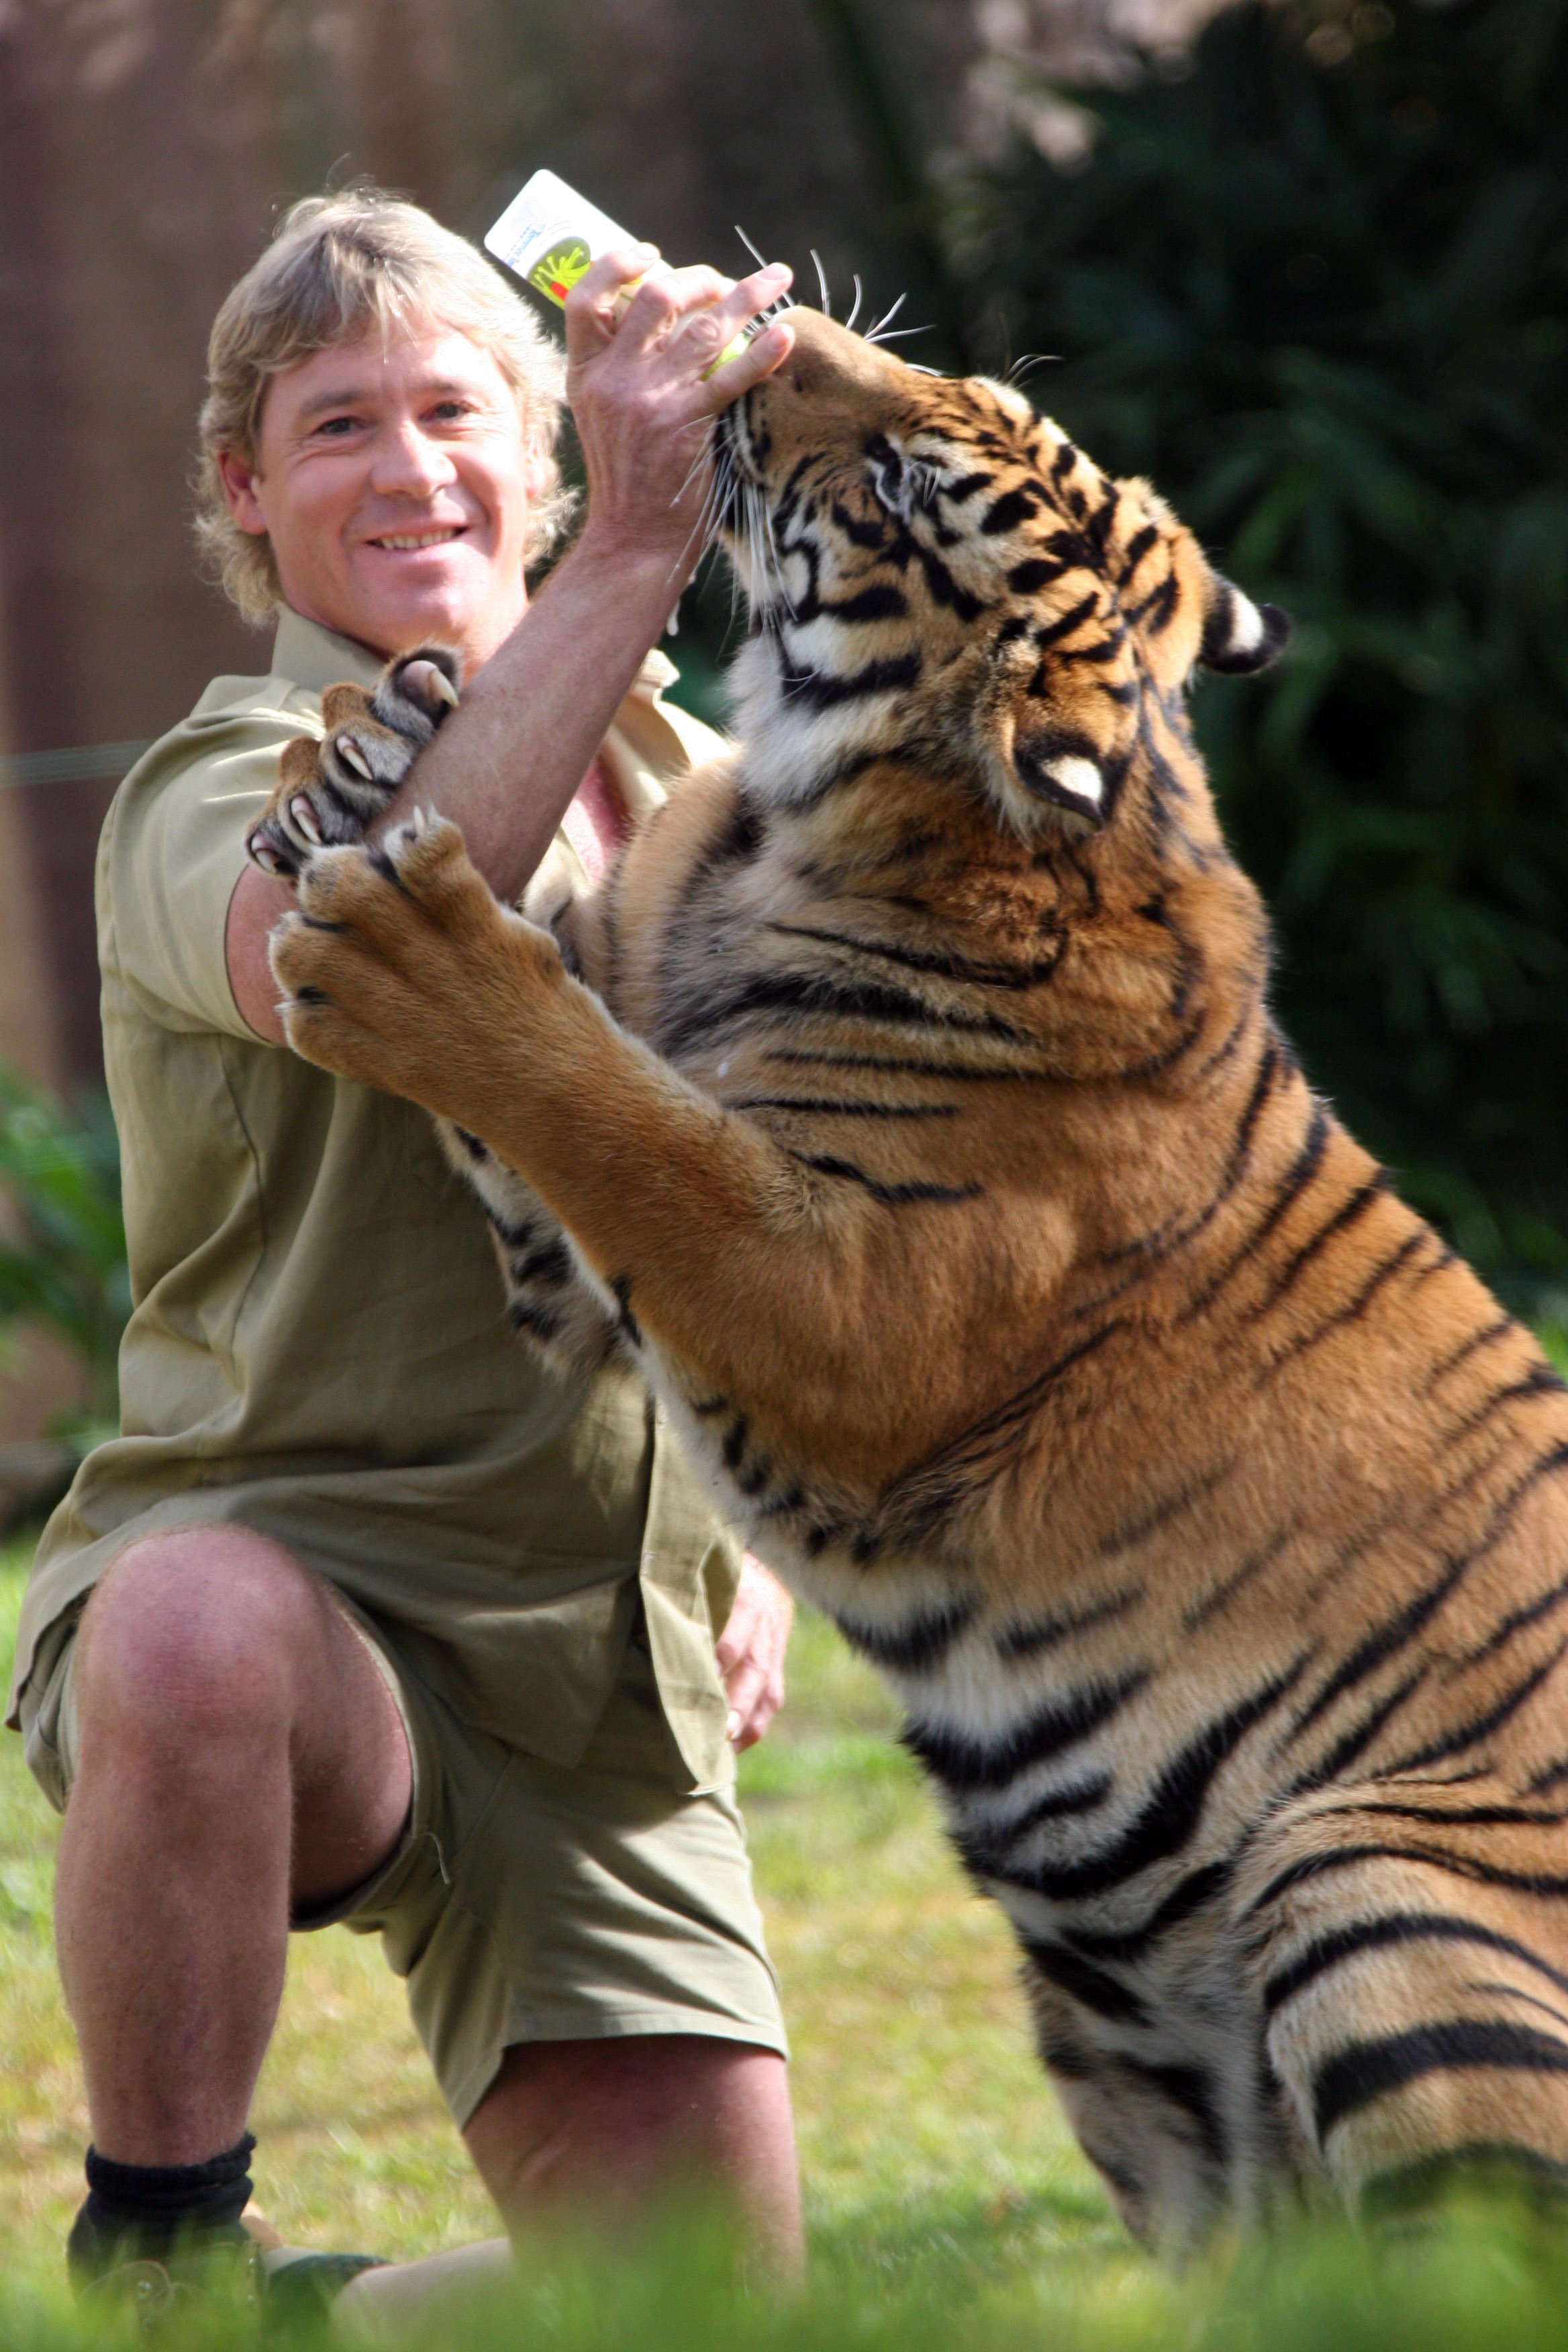 Steve Irwin poses with a tiger at Australia Zoo June 1, 2005 in Beerwah, Australia.. Photos: Getty Images